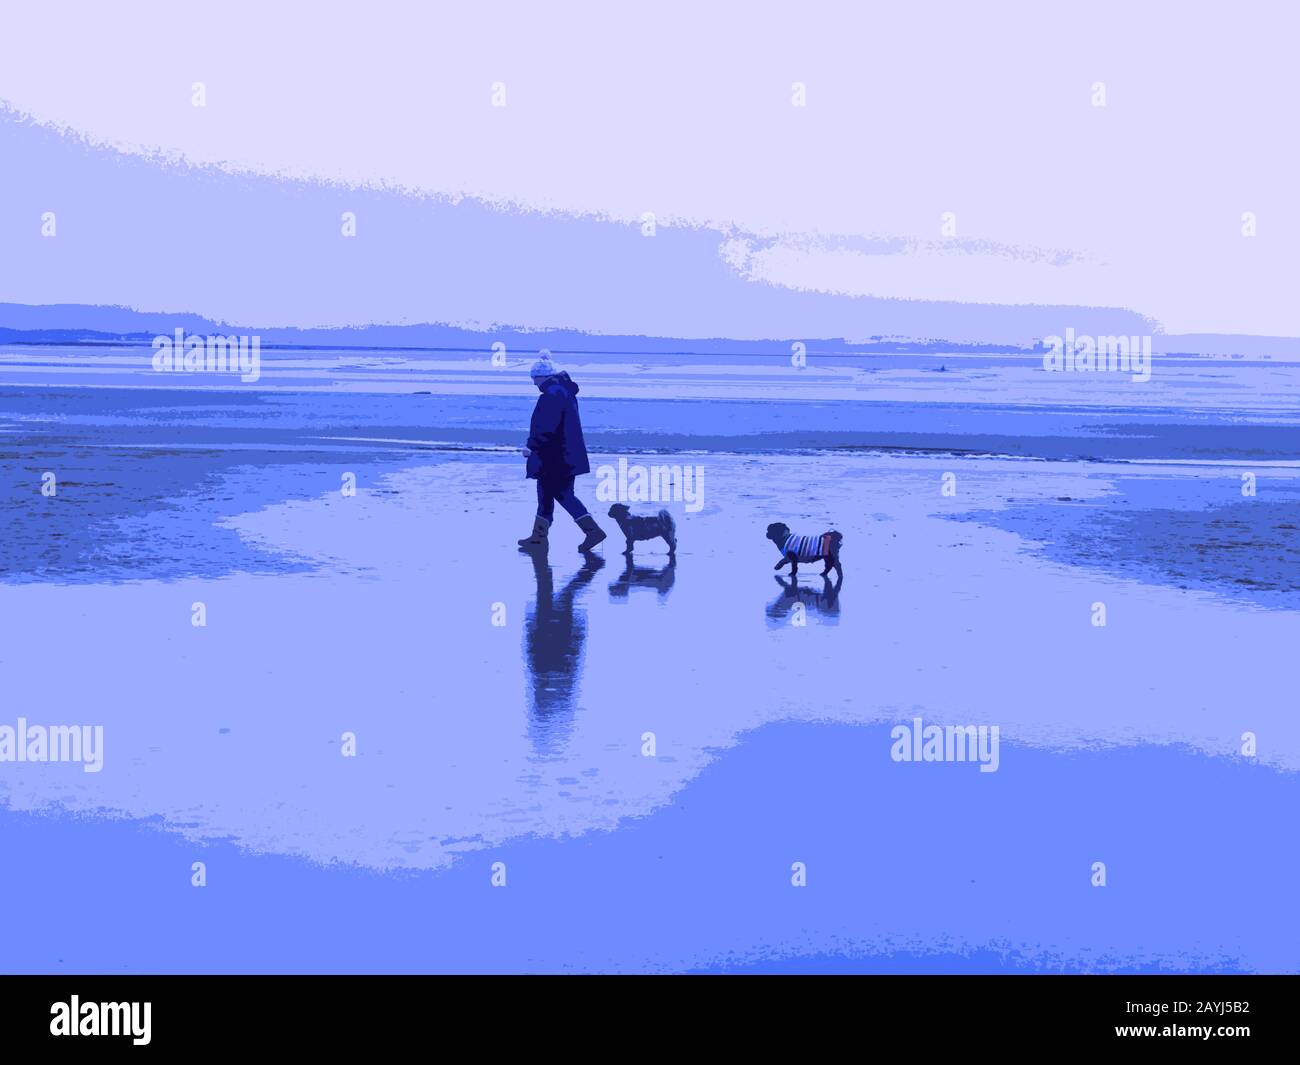 Woman walking two small dogs on a beach their reflections are cast on the wet sand Stock Photo